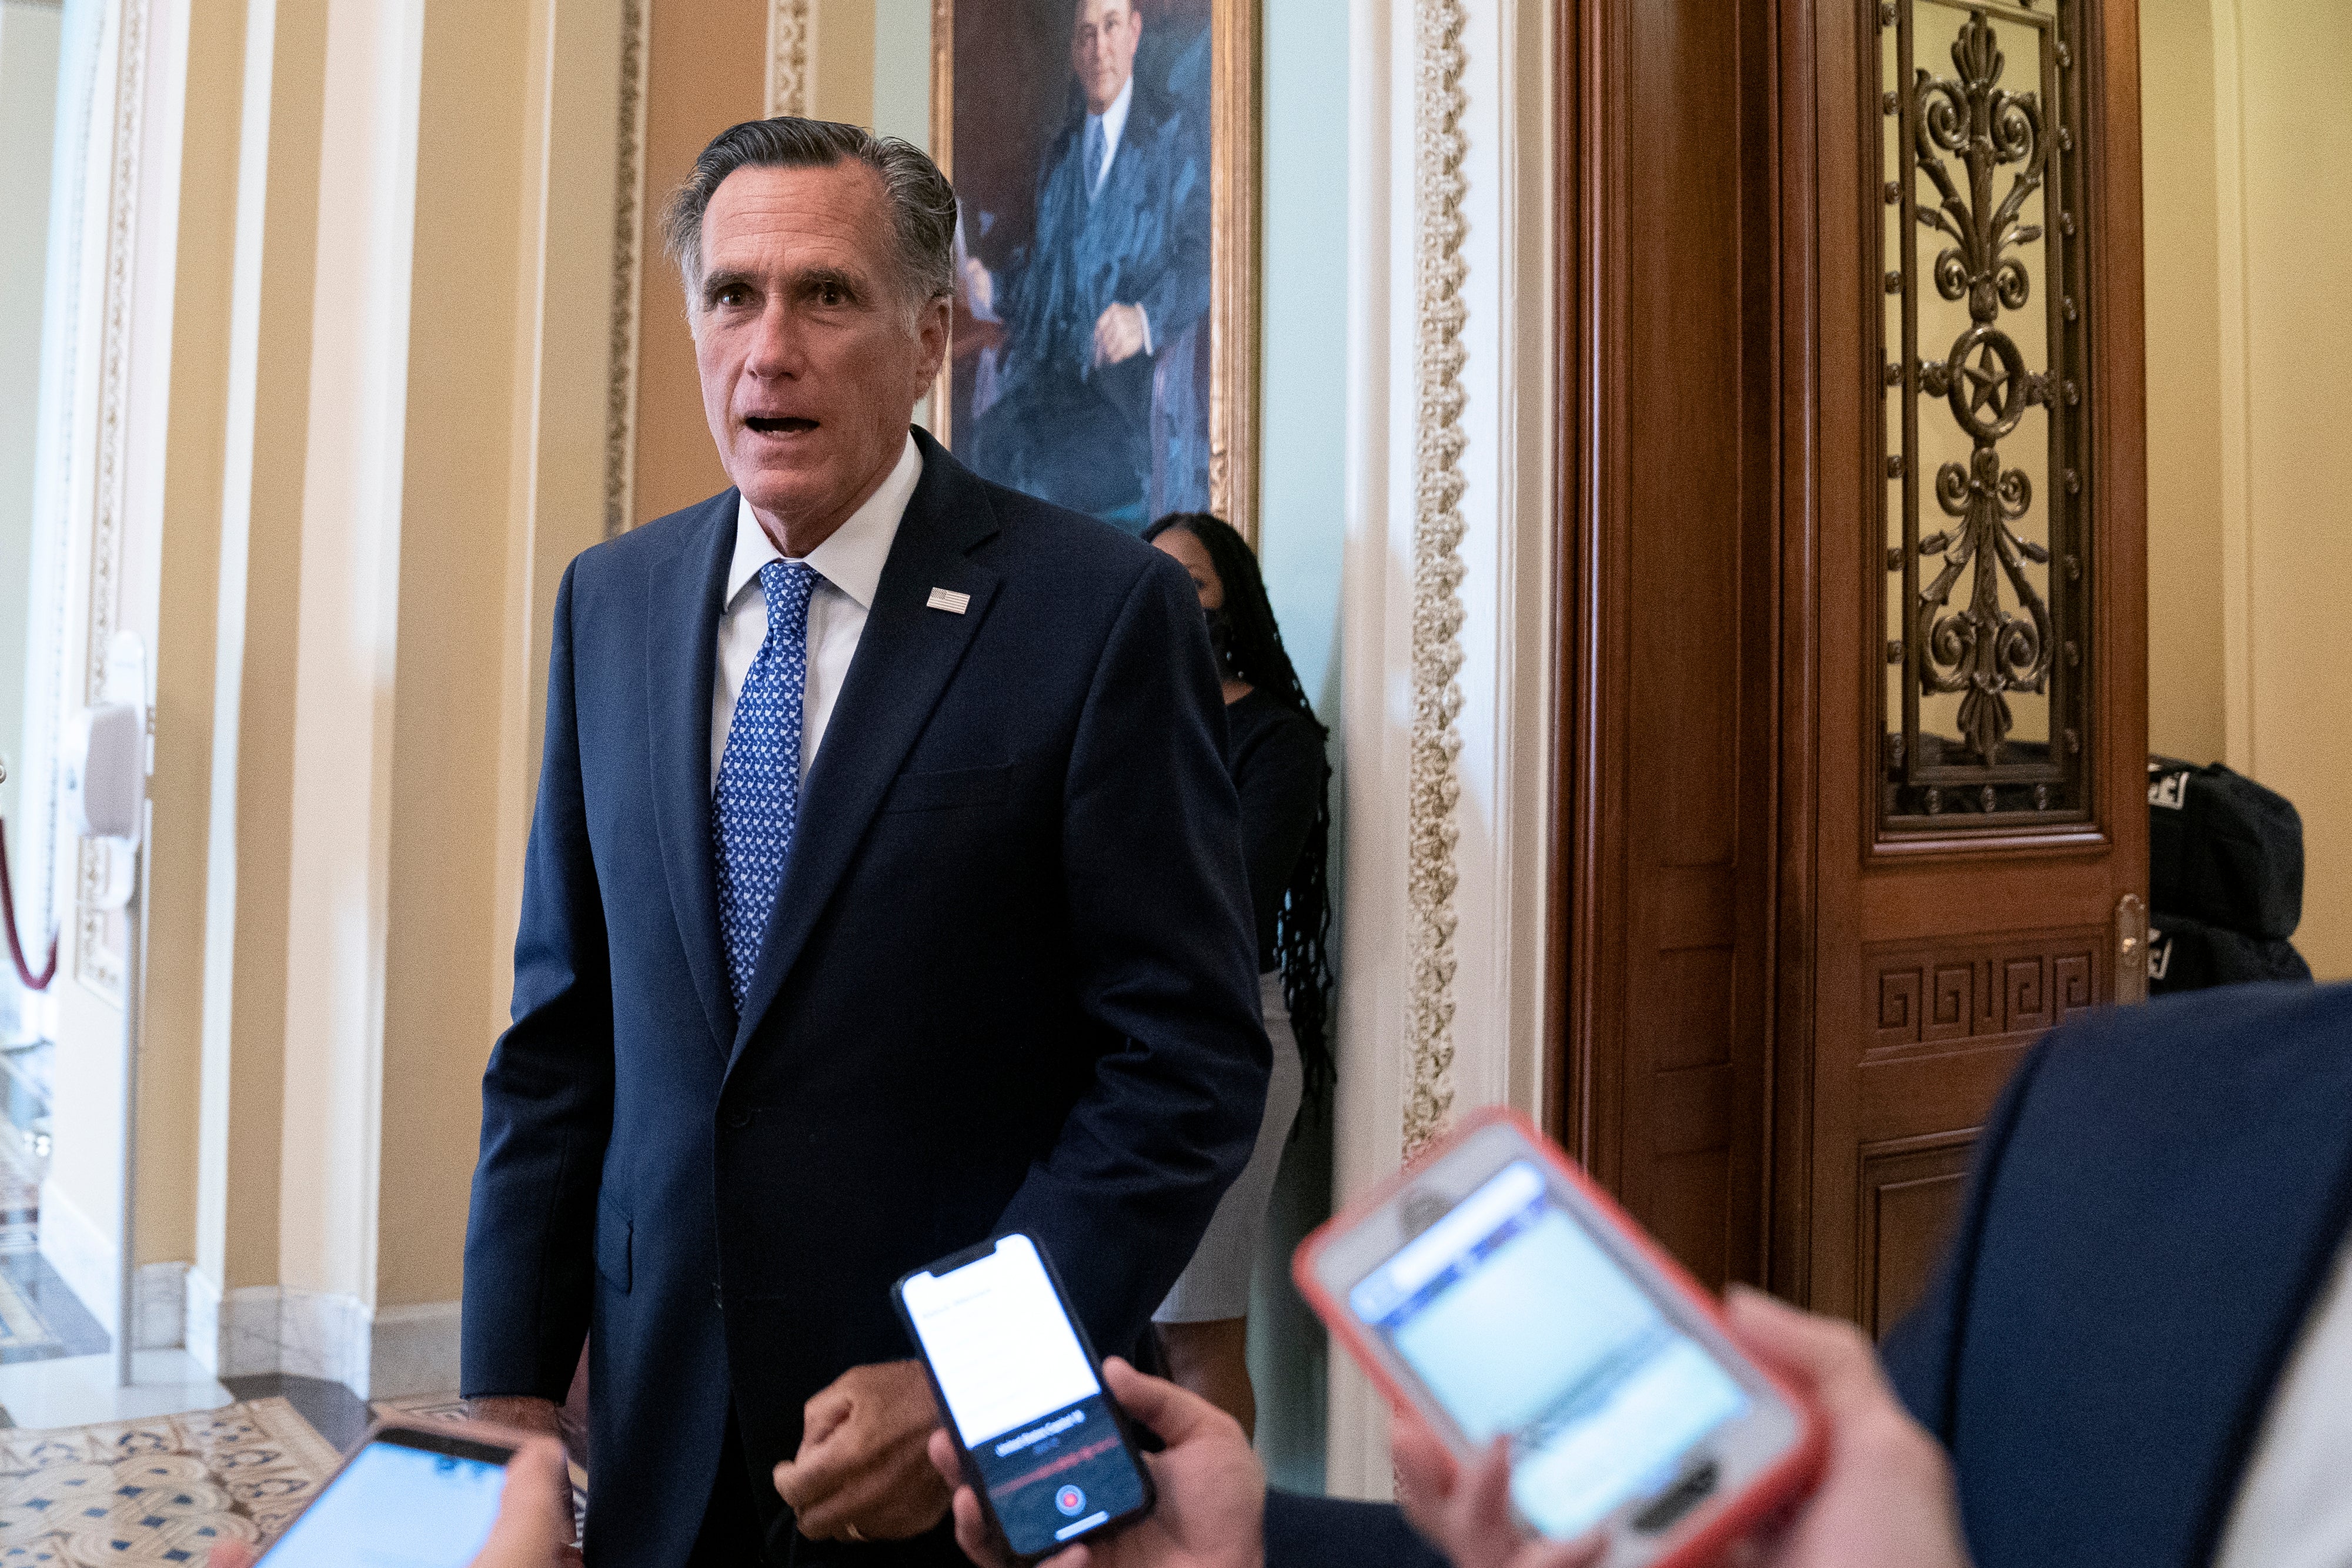 Senator Mitt Romney, R-Utah, will vote on Donald Trump's Supreme Court pick "based on their qualifications," he said on Tuesday.